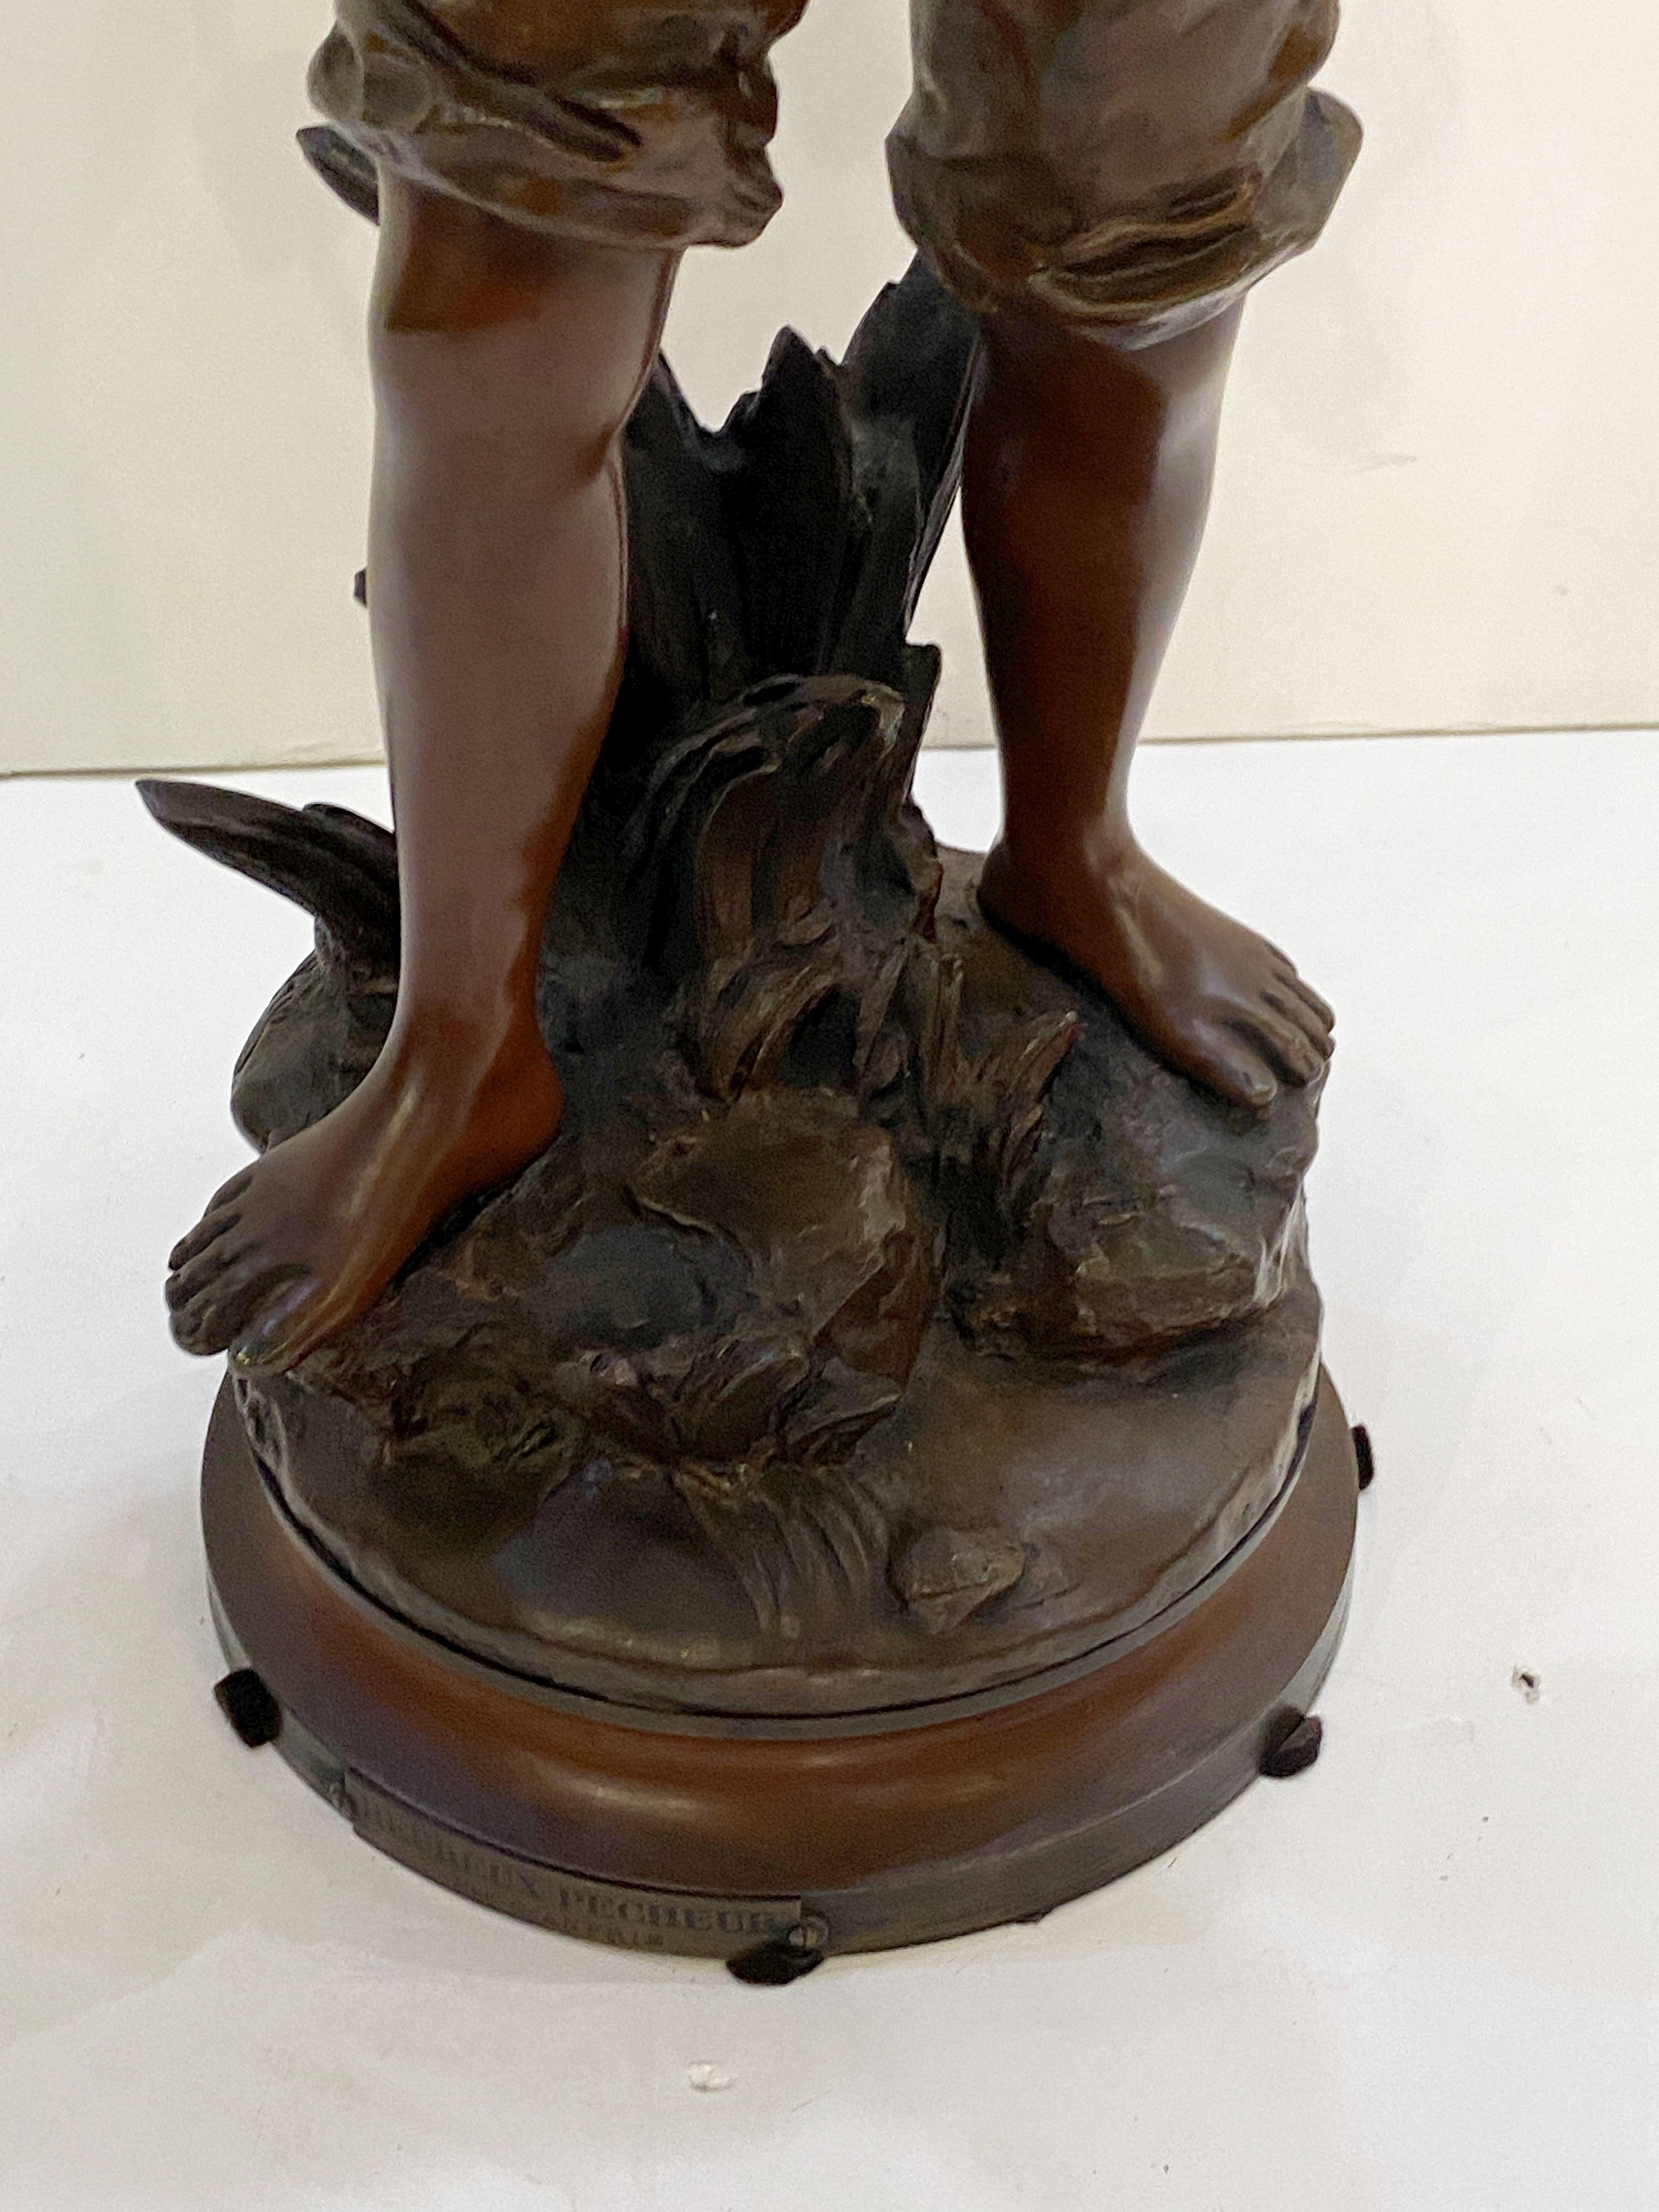 Heureux Pêcheur or Happy Fisherboy Bronze Sculptural Figure by Charles Anfrie  10